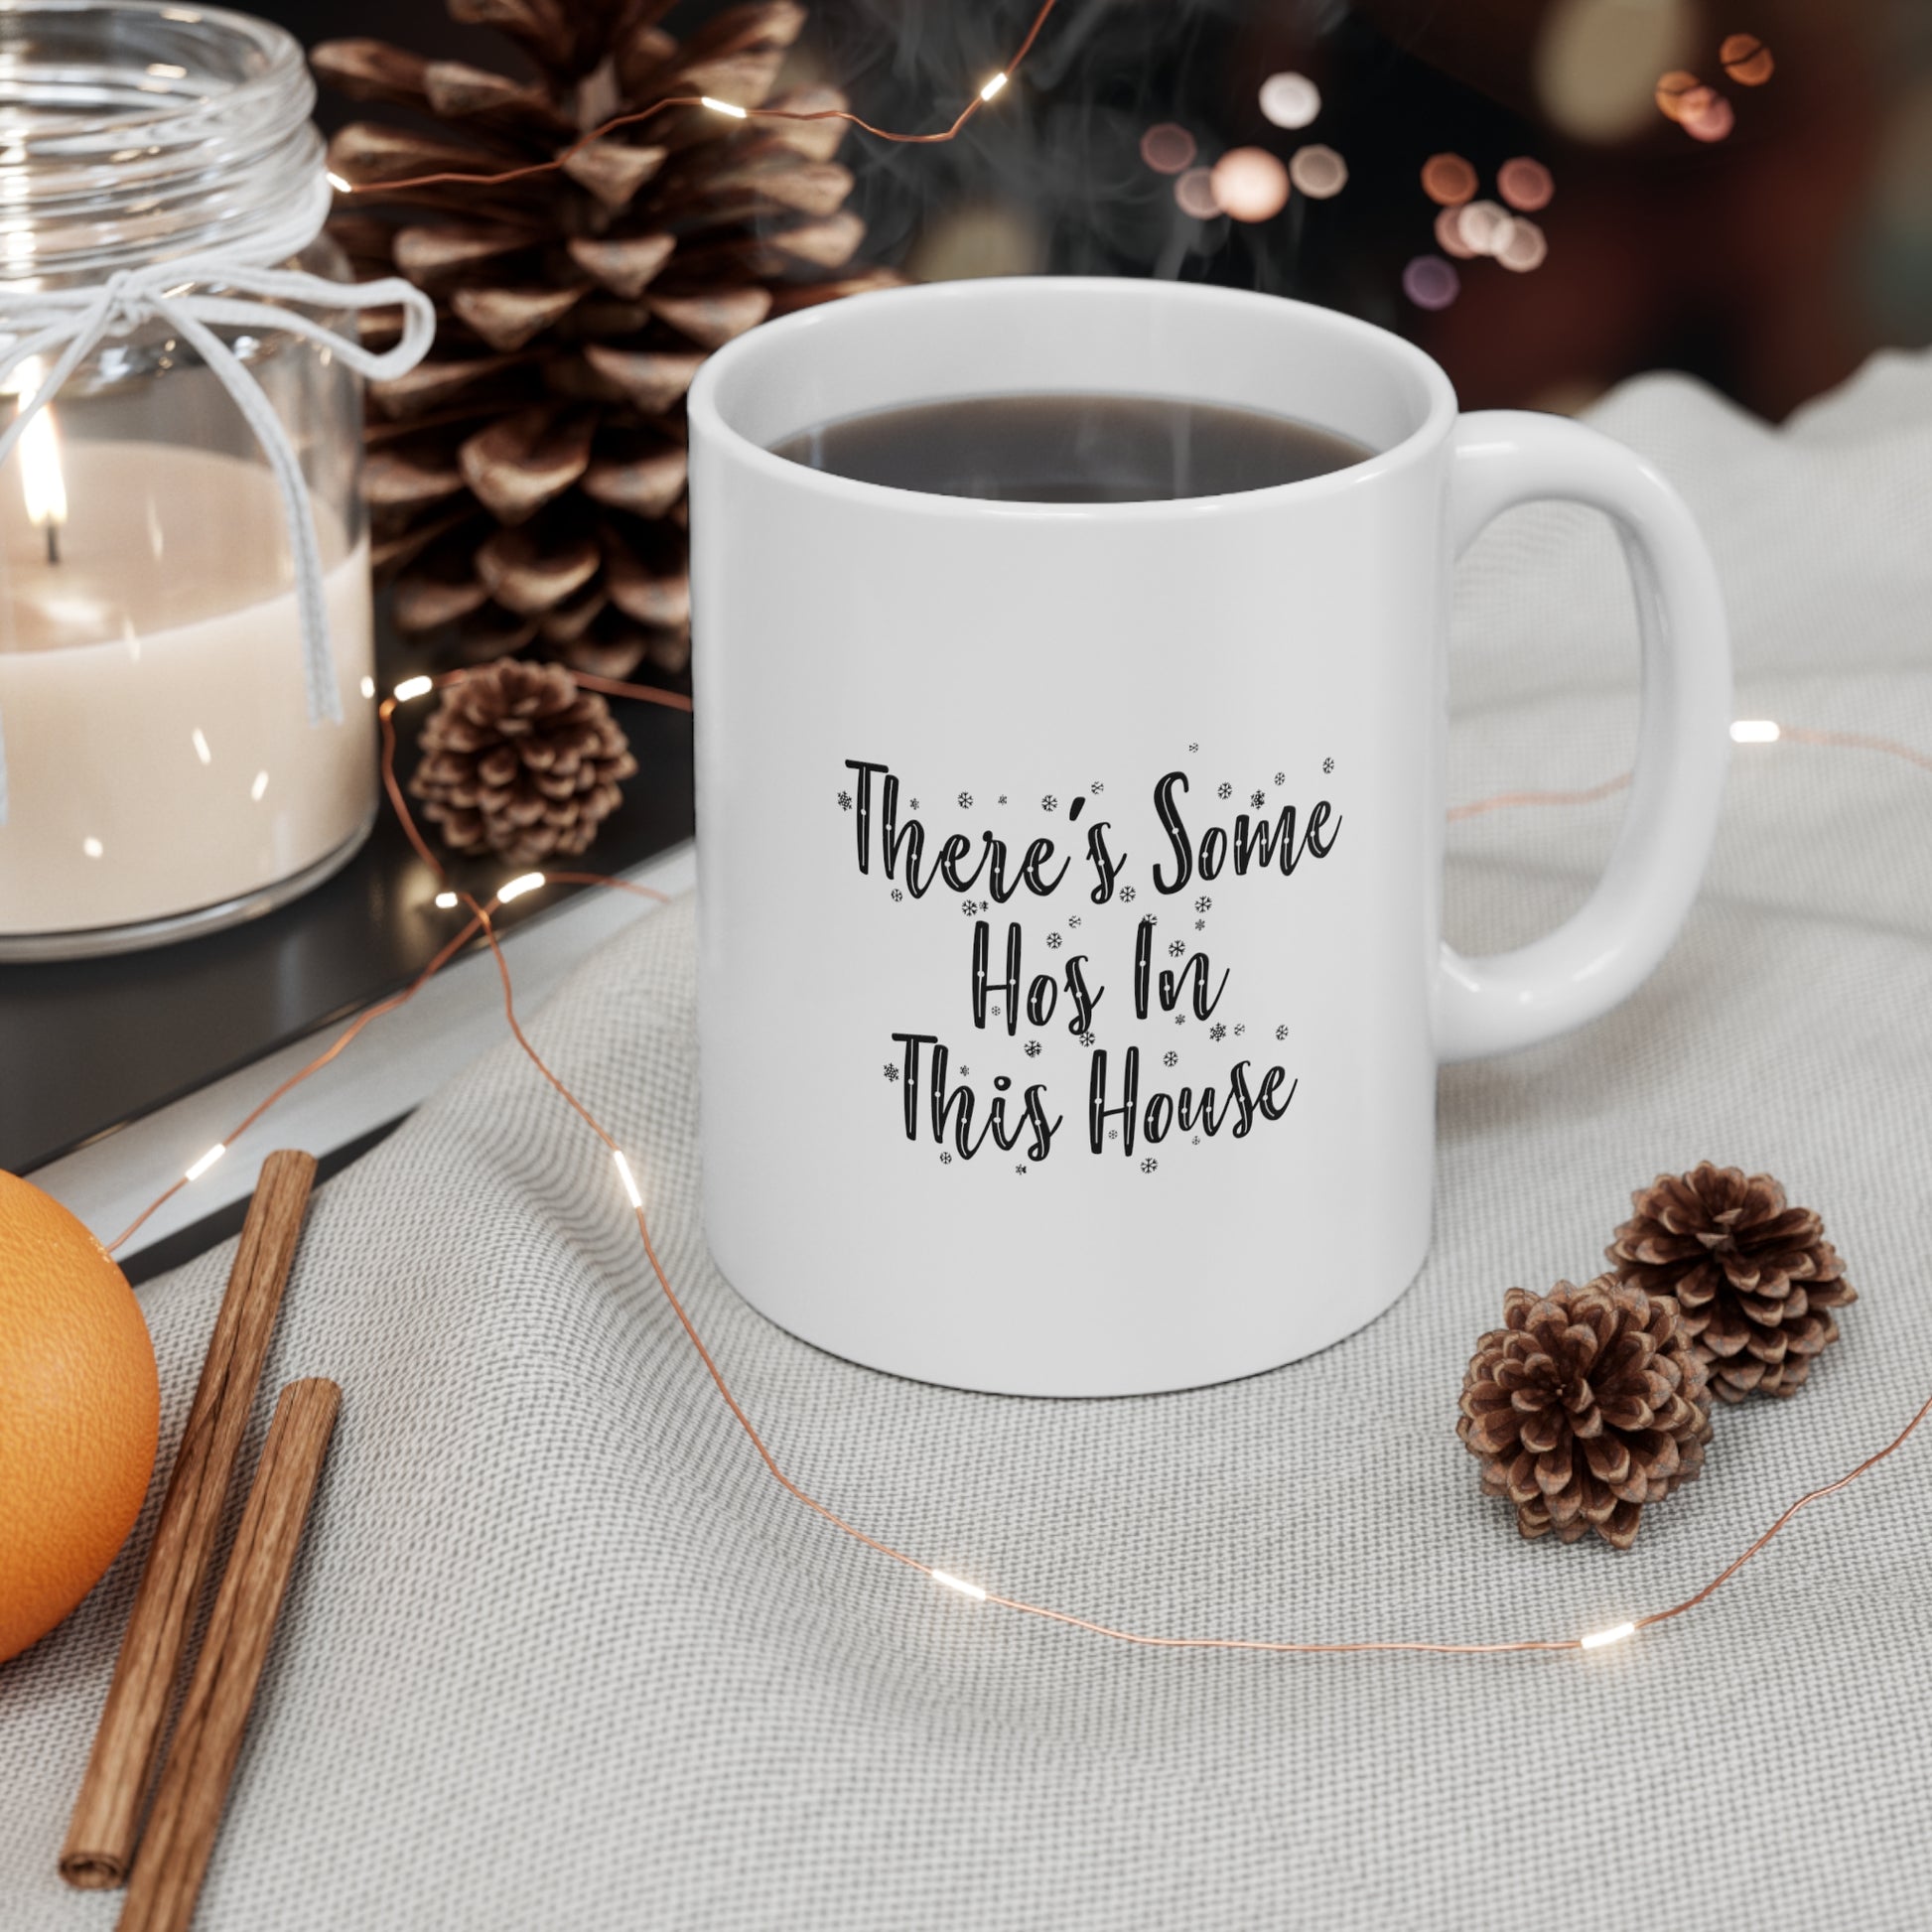 Mug with the quote "There's some hos in this house"